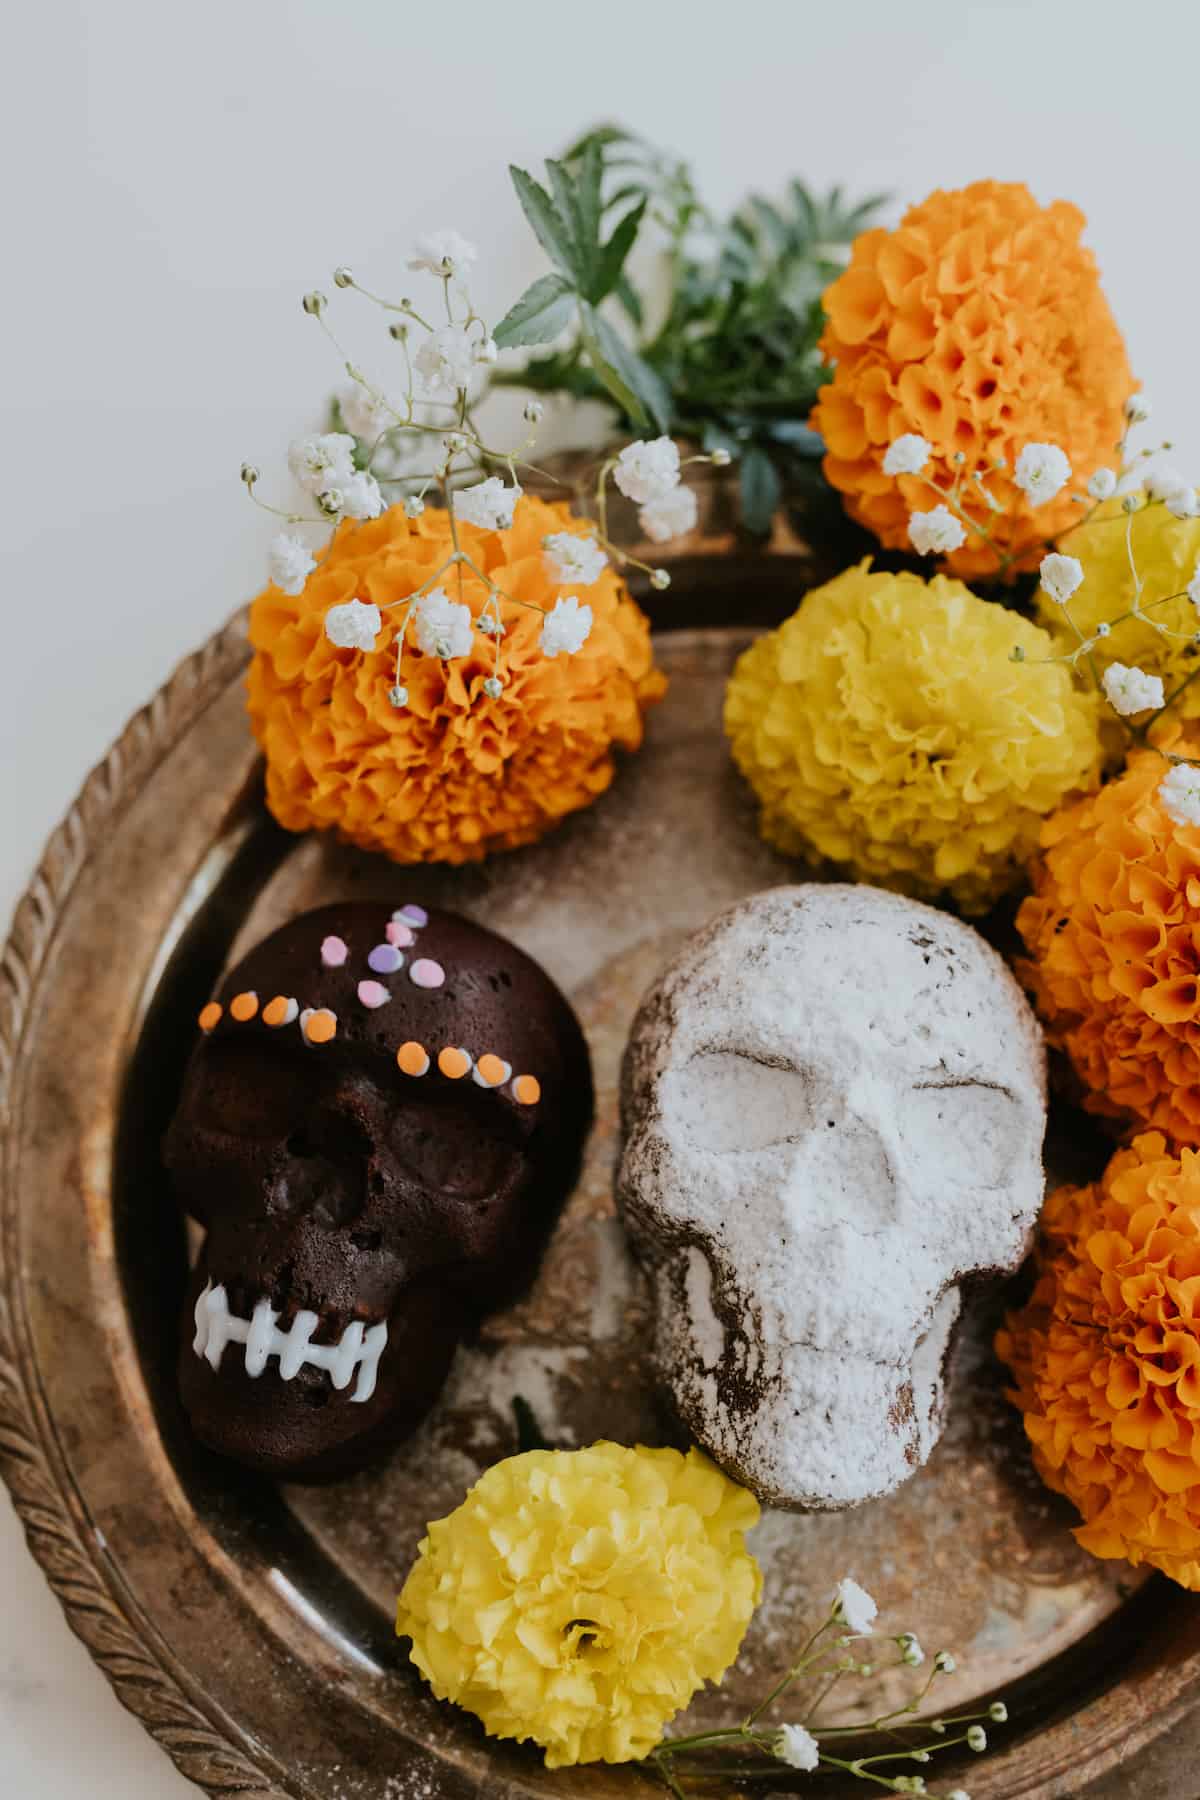 Chocolate Skull Cakes decorated for Dia de los Muertos surrounded by marigolds 